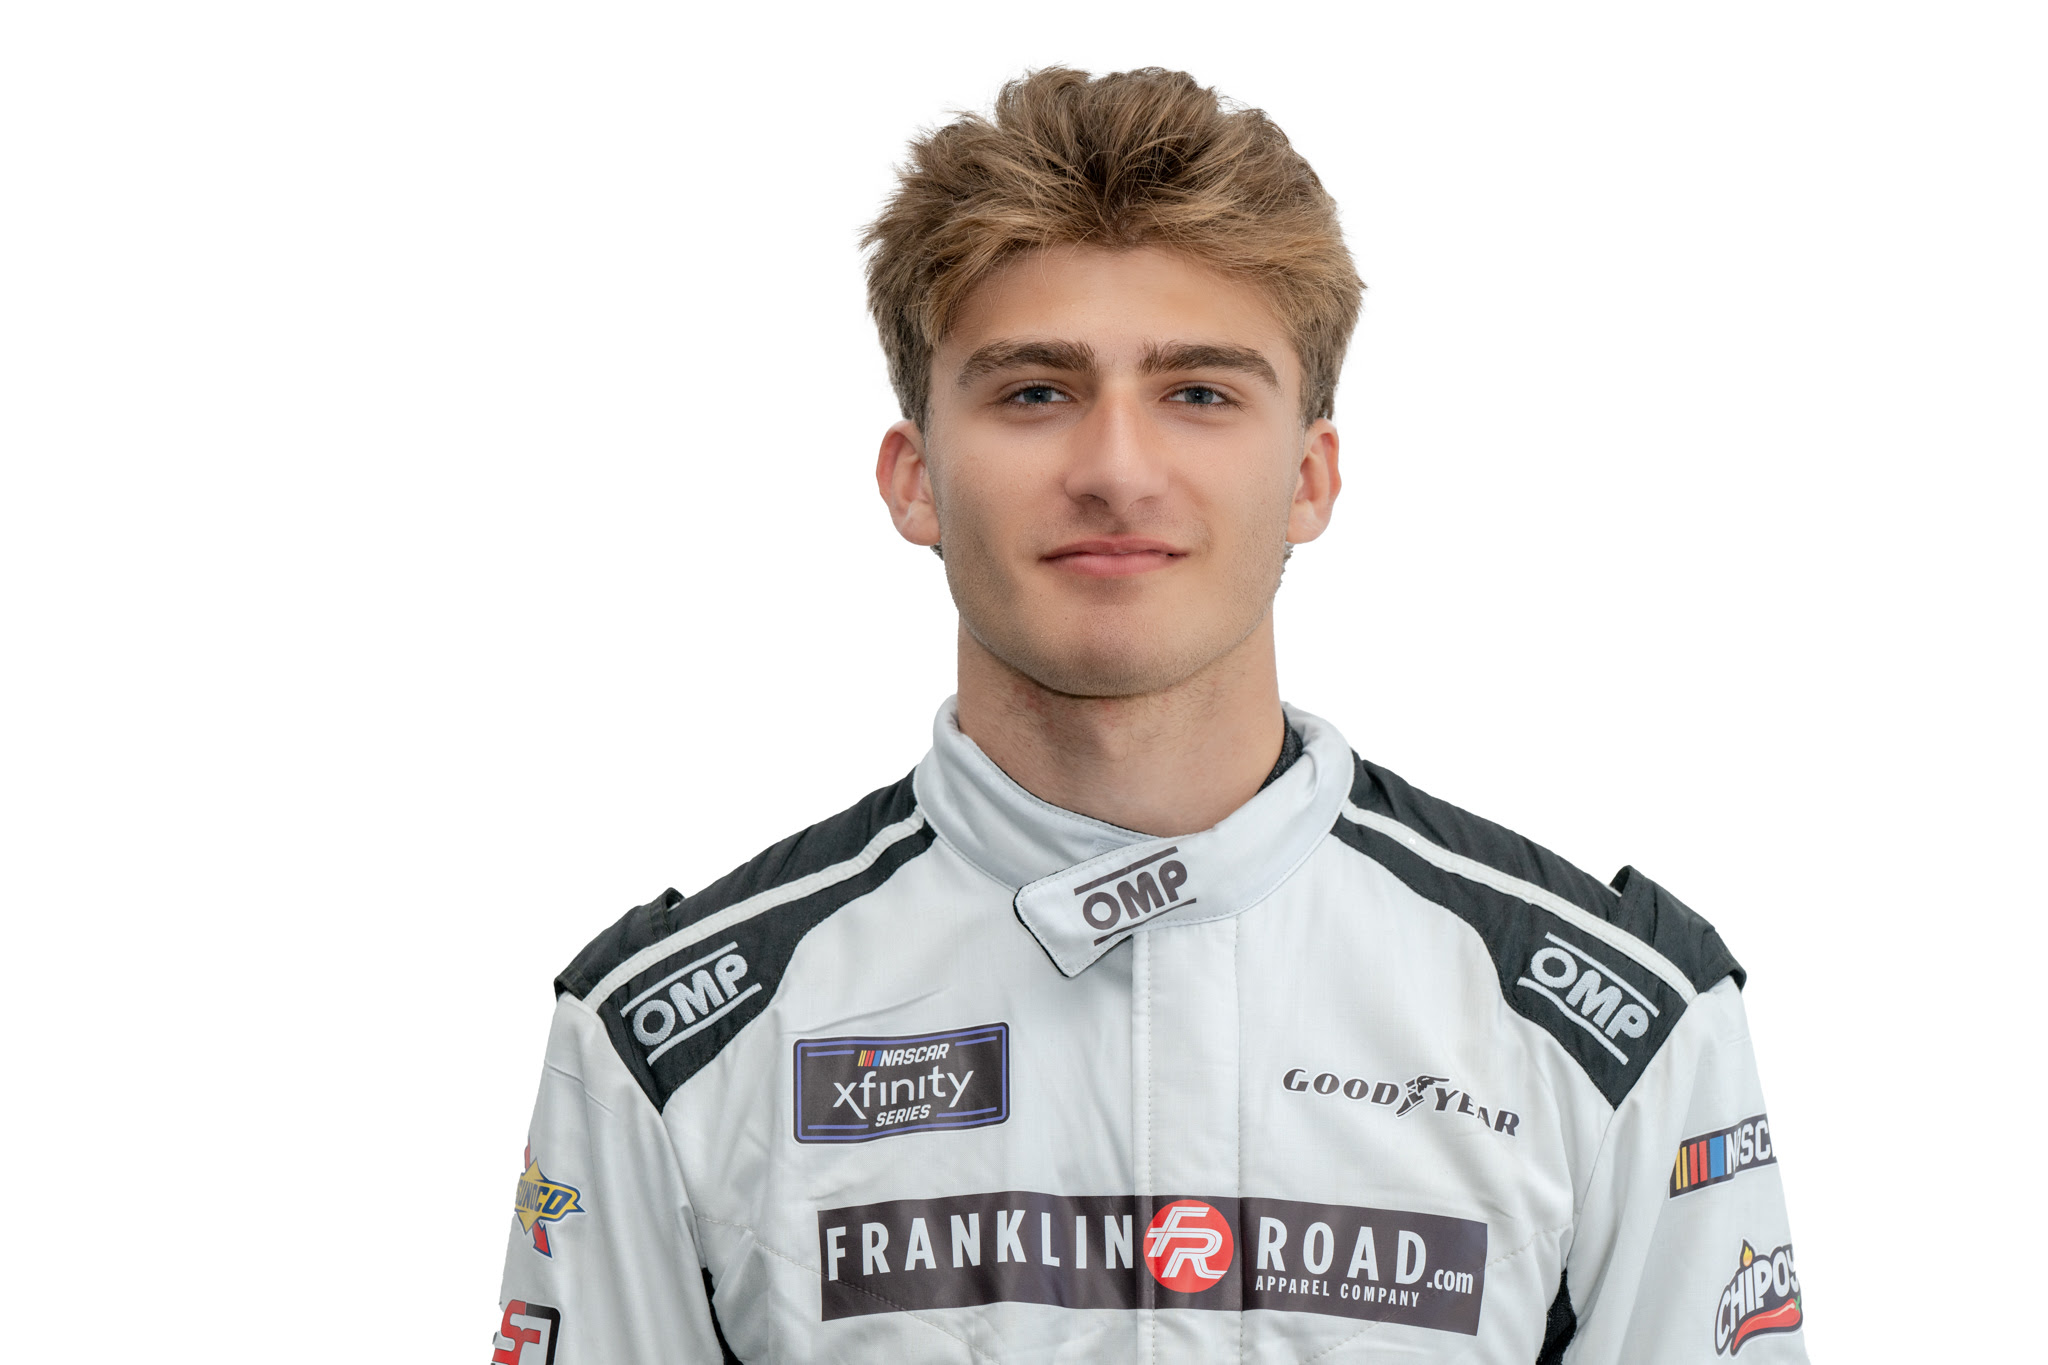 Thomas Annunziata will take on Pocono Raceway’s Tricky Triangle this weekend with Criswell Chevrolet Buick GMC